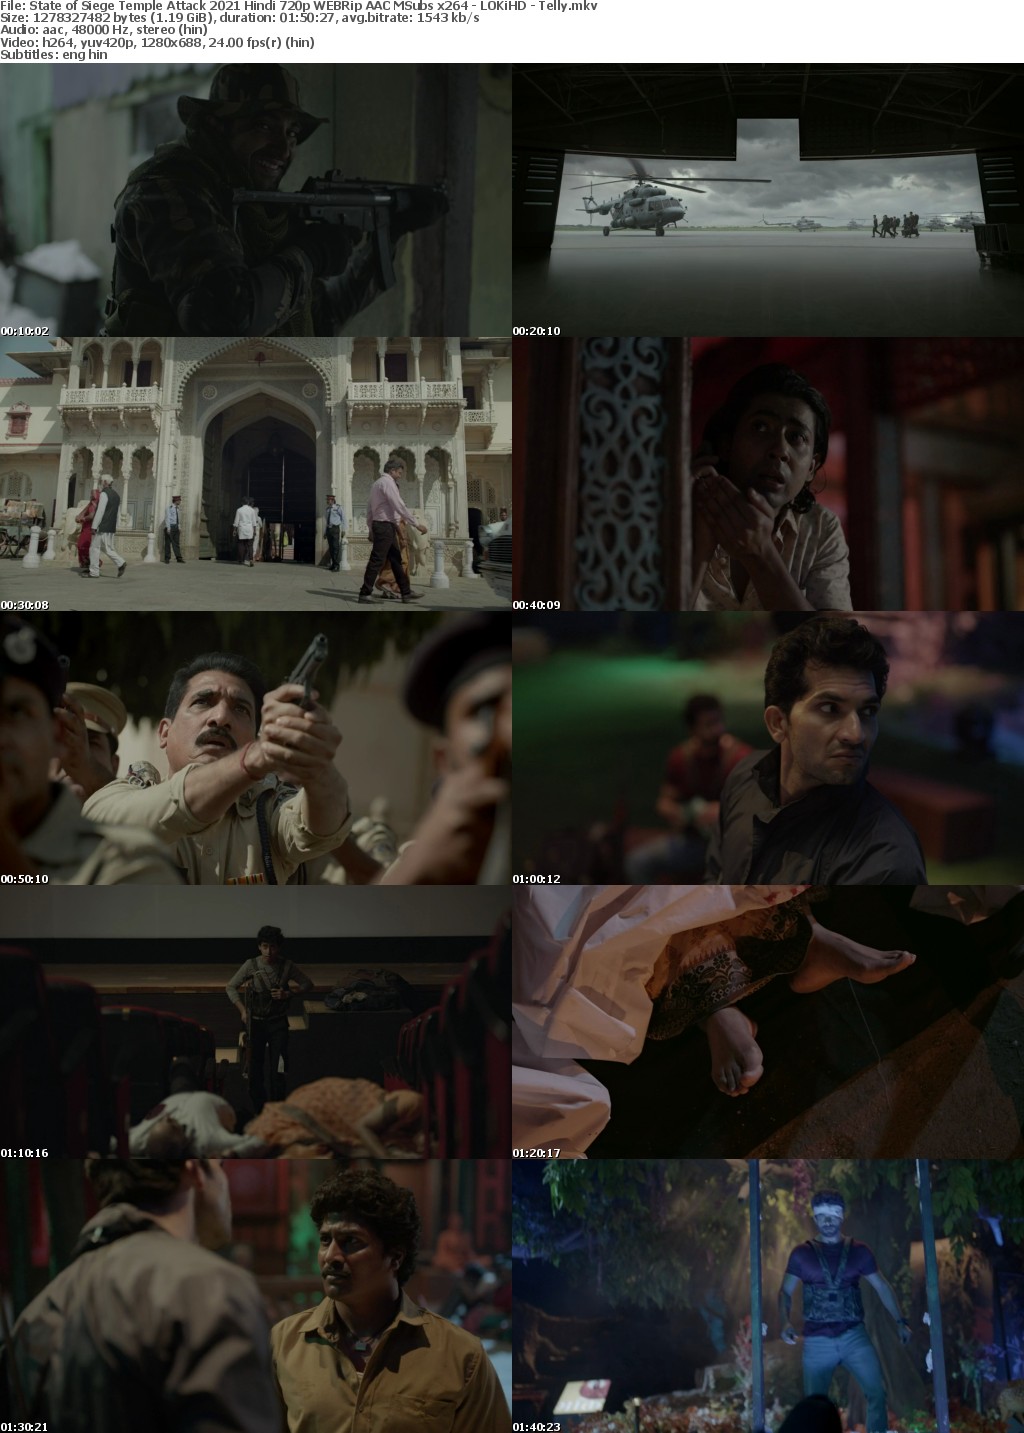 State of Siege Temple Attack 2021 Hindi 720p WEBRip AAC MSubs x264 - LOKiHD - Telly mkv